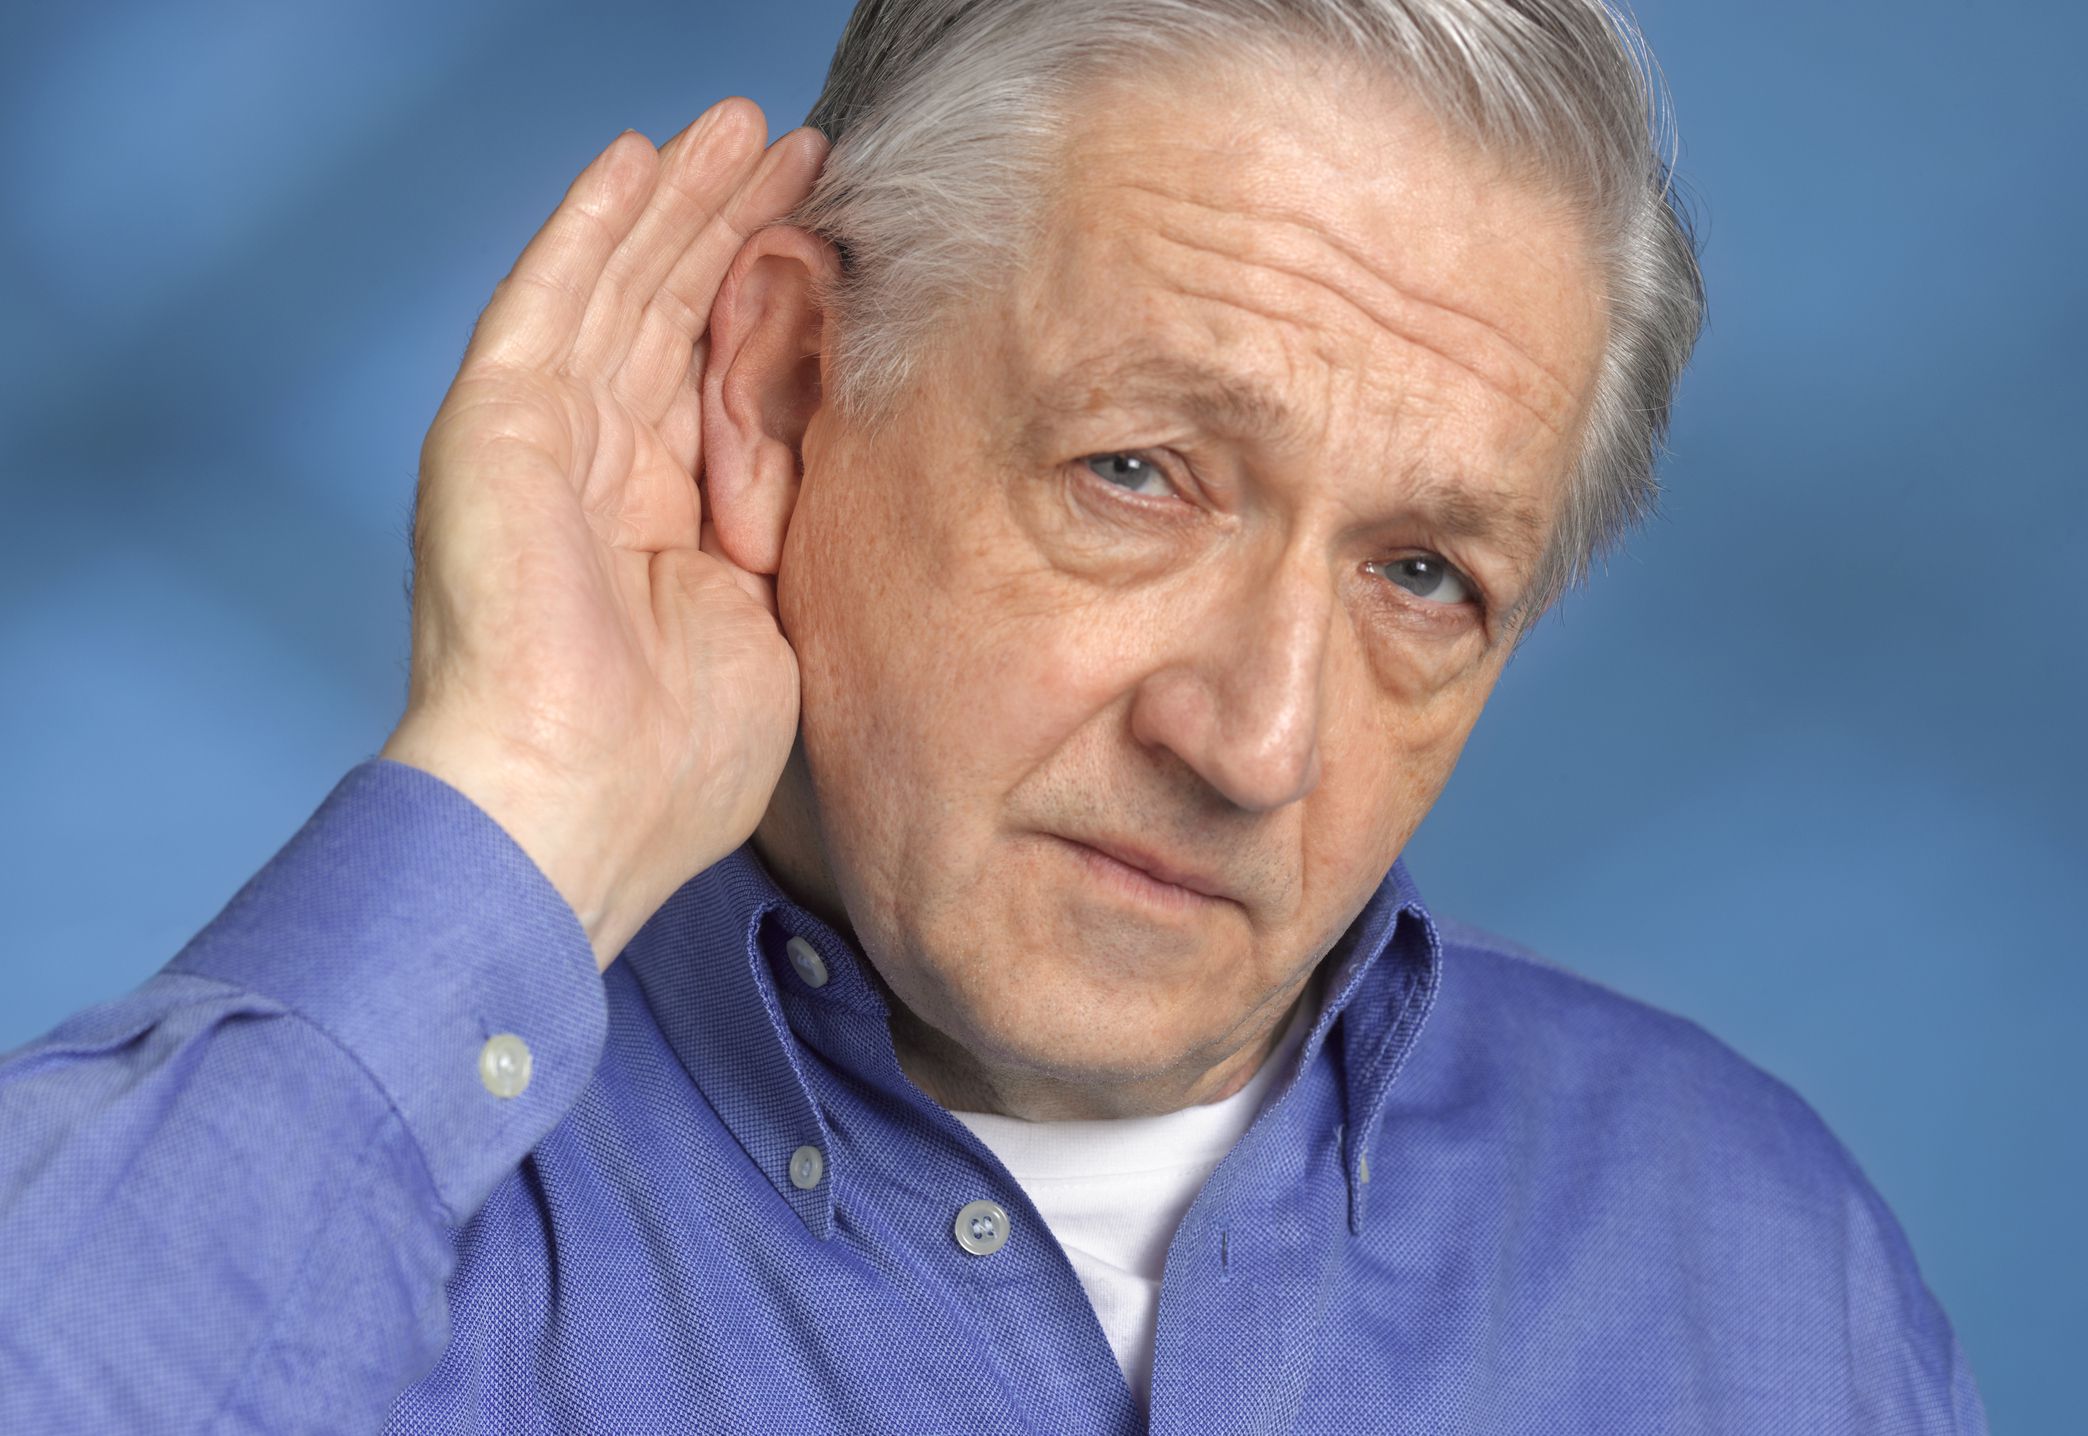 Possible Causes of Sudden Hearing Loss